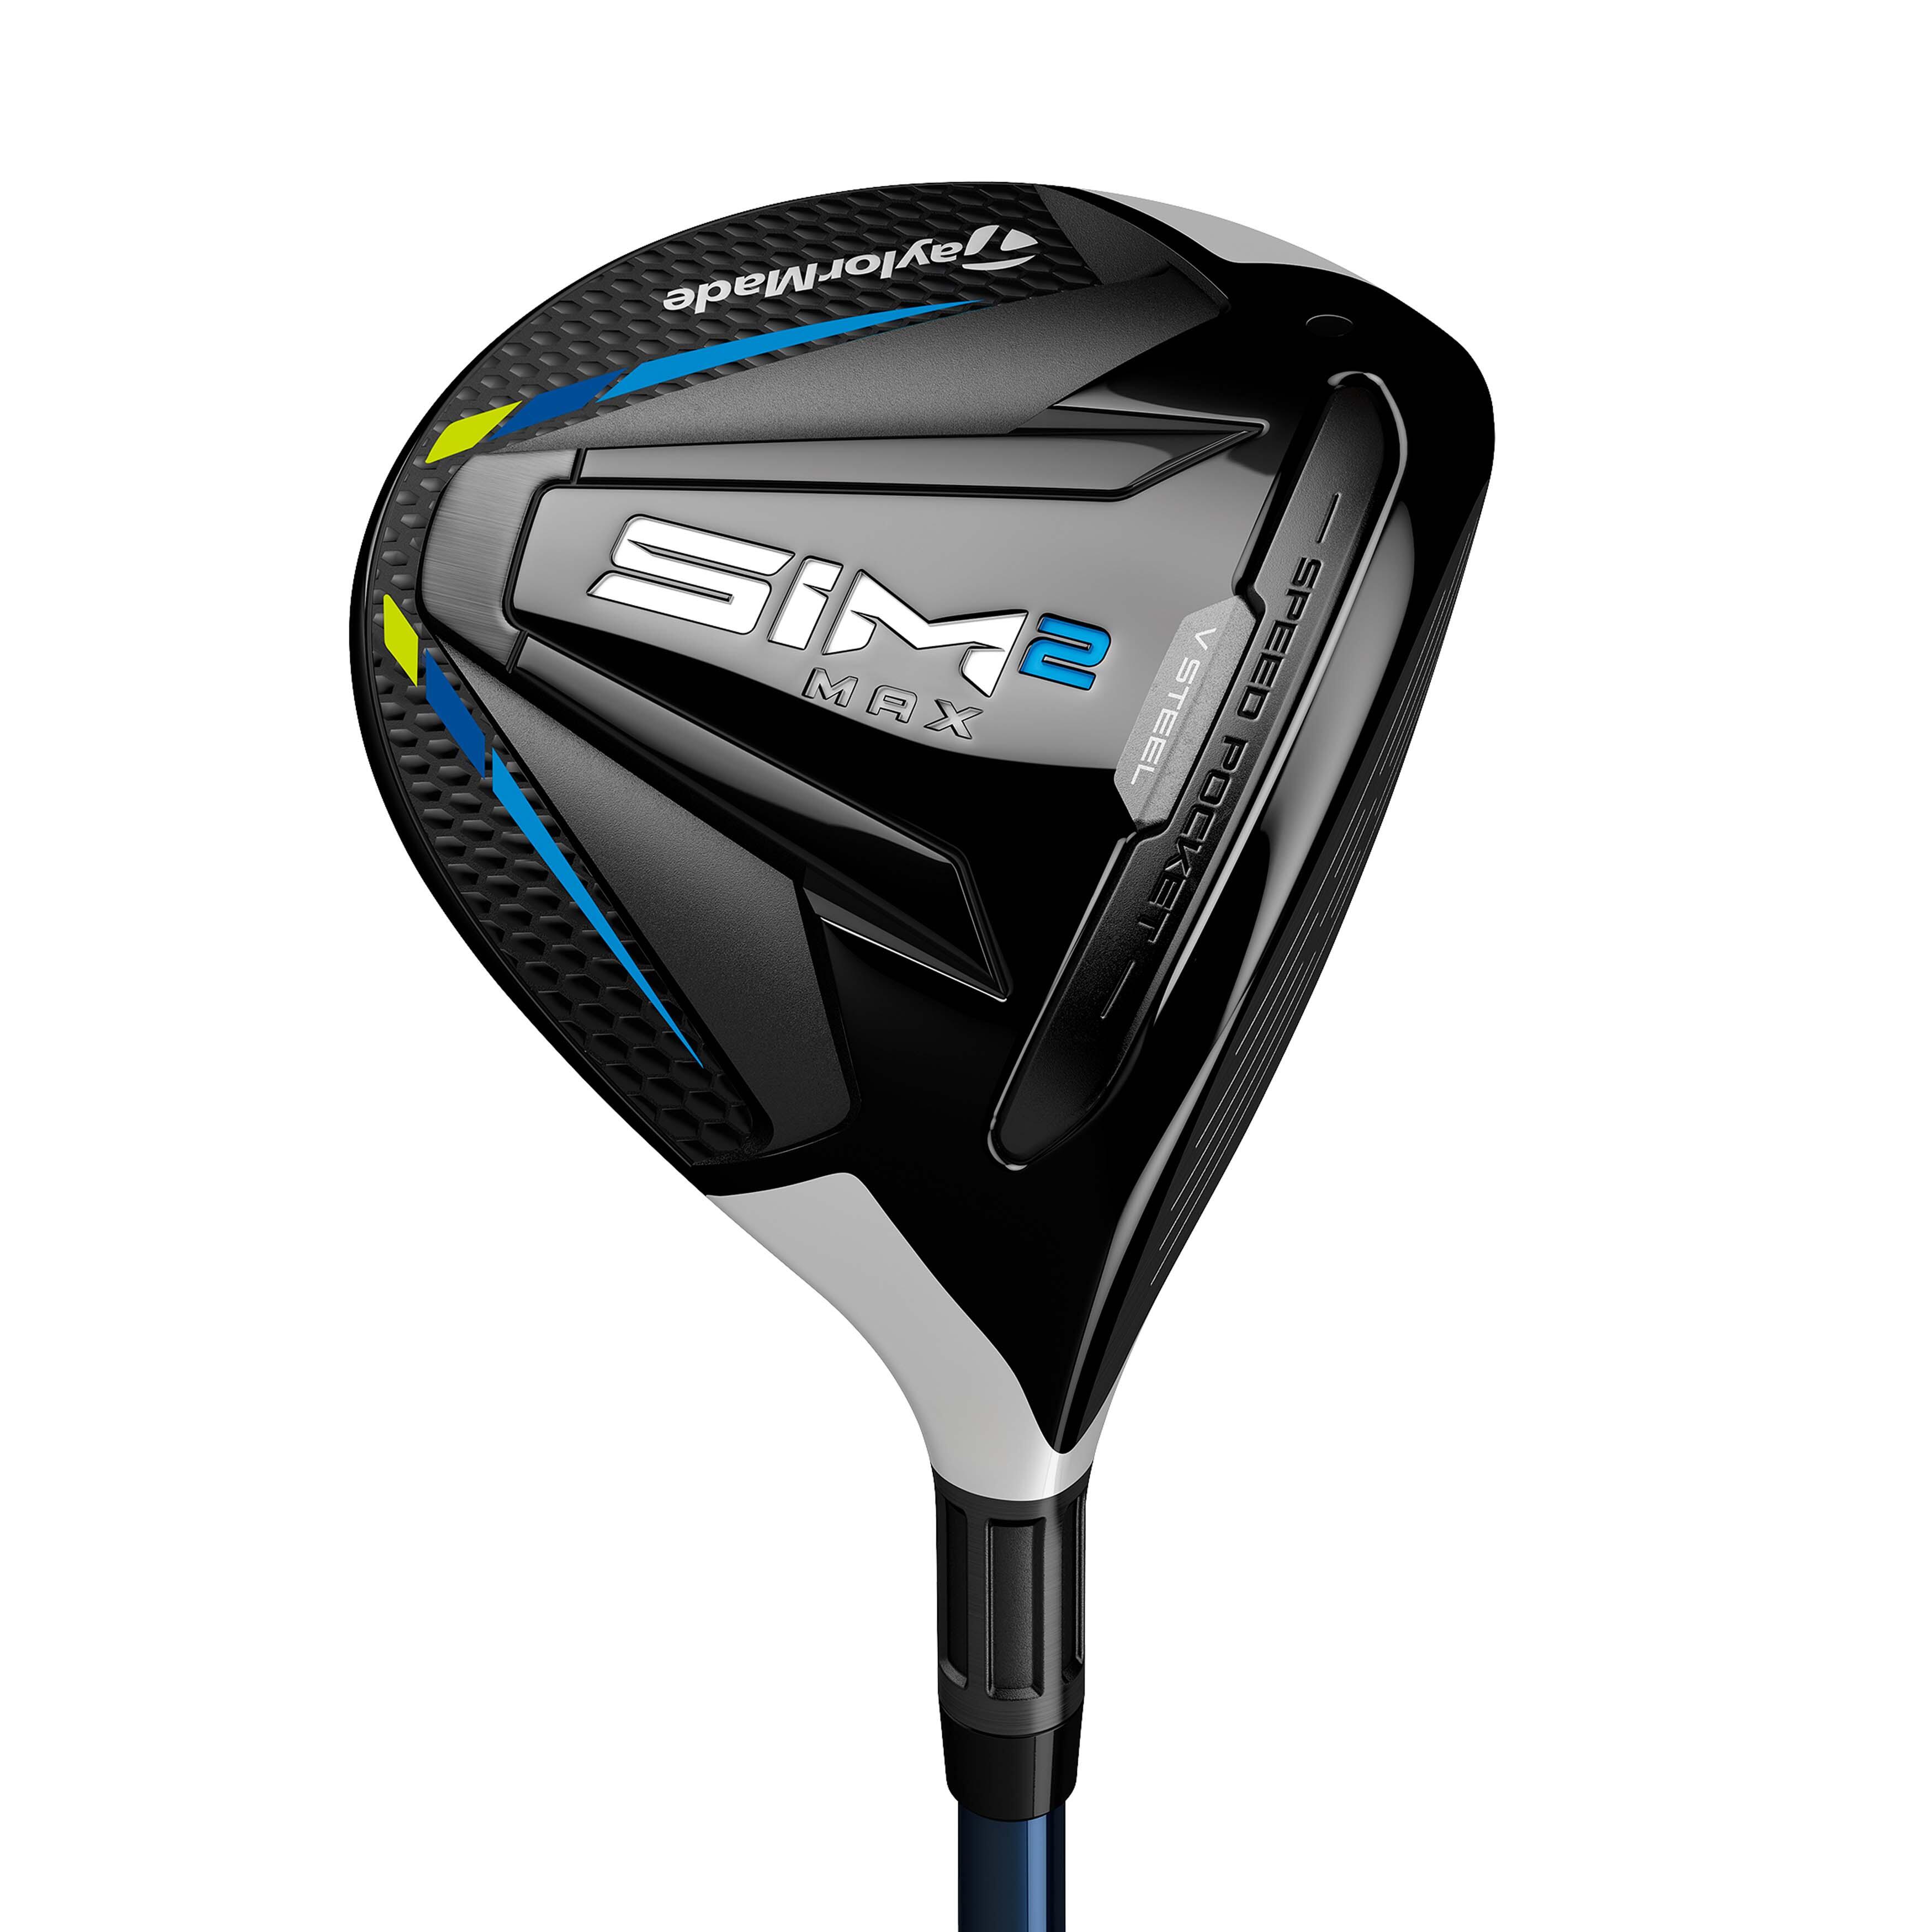 TAYLORMADE Bois 5 Golf Droitier Senior - Taylormade Sim2 Max